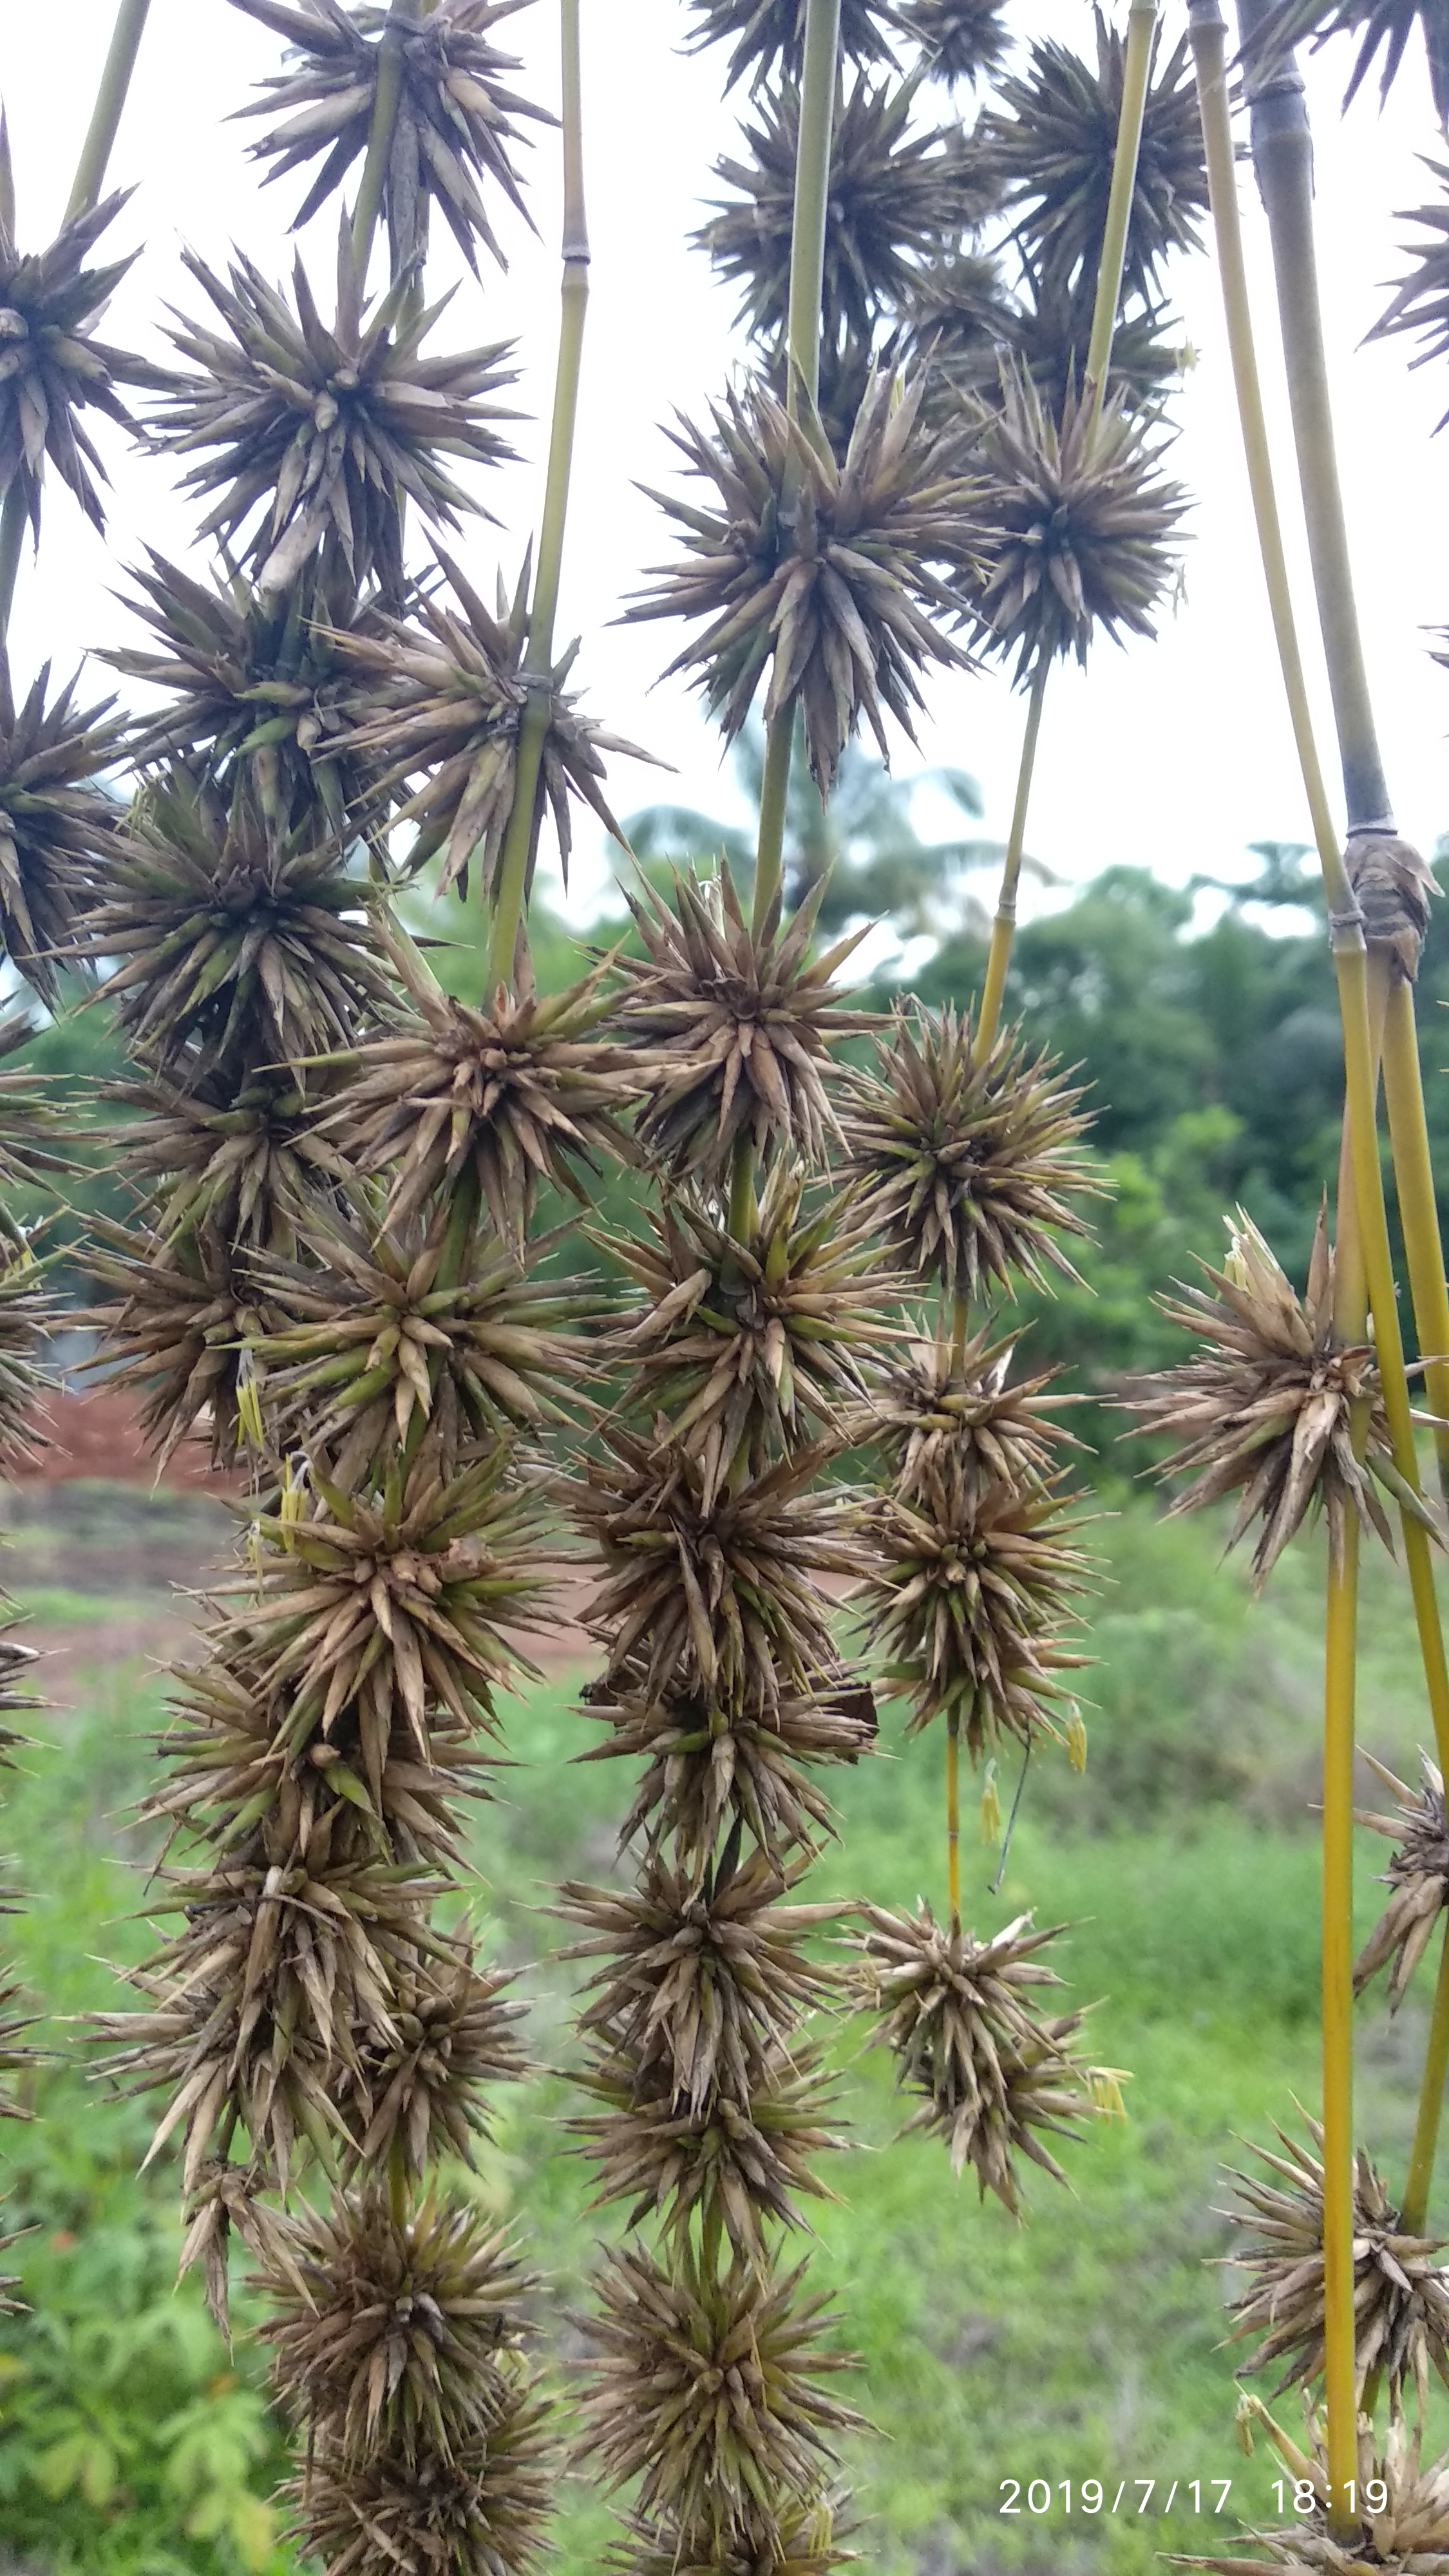 Bamboo Seeds in bunches